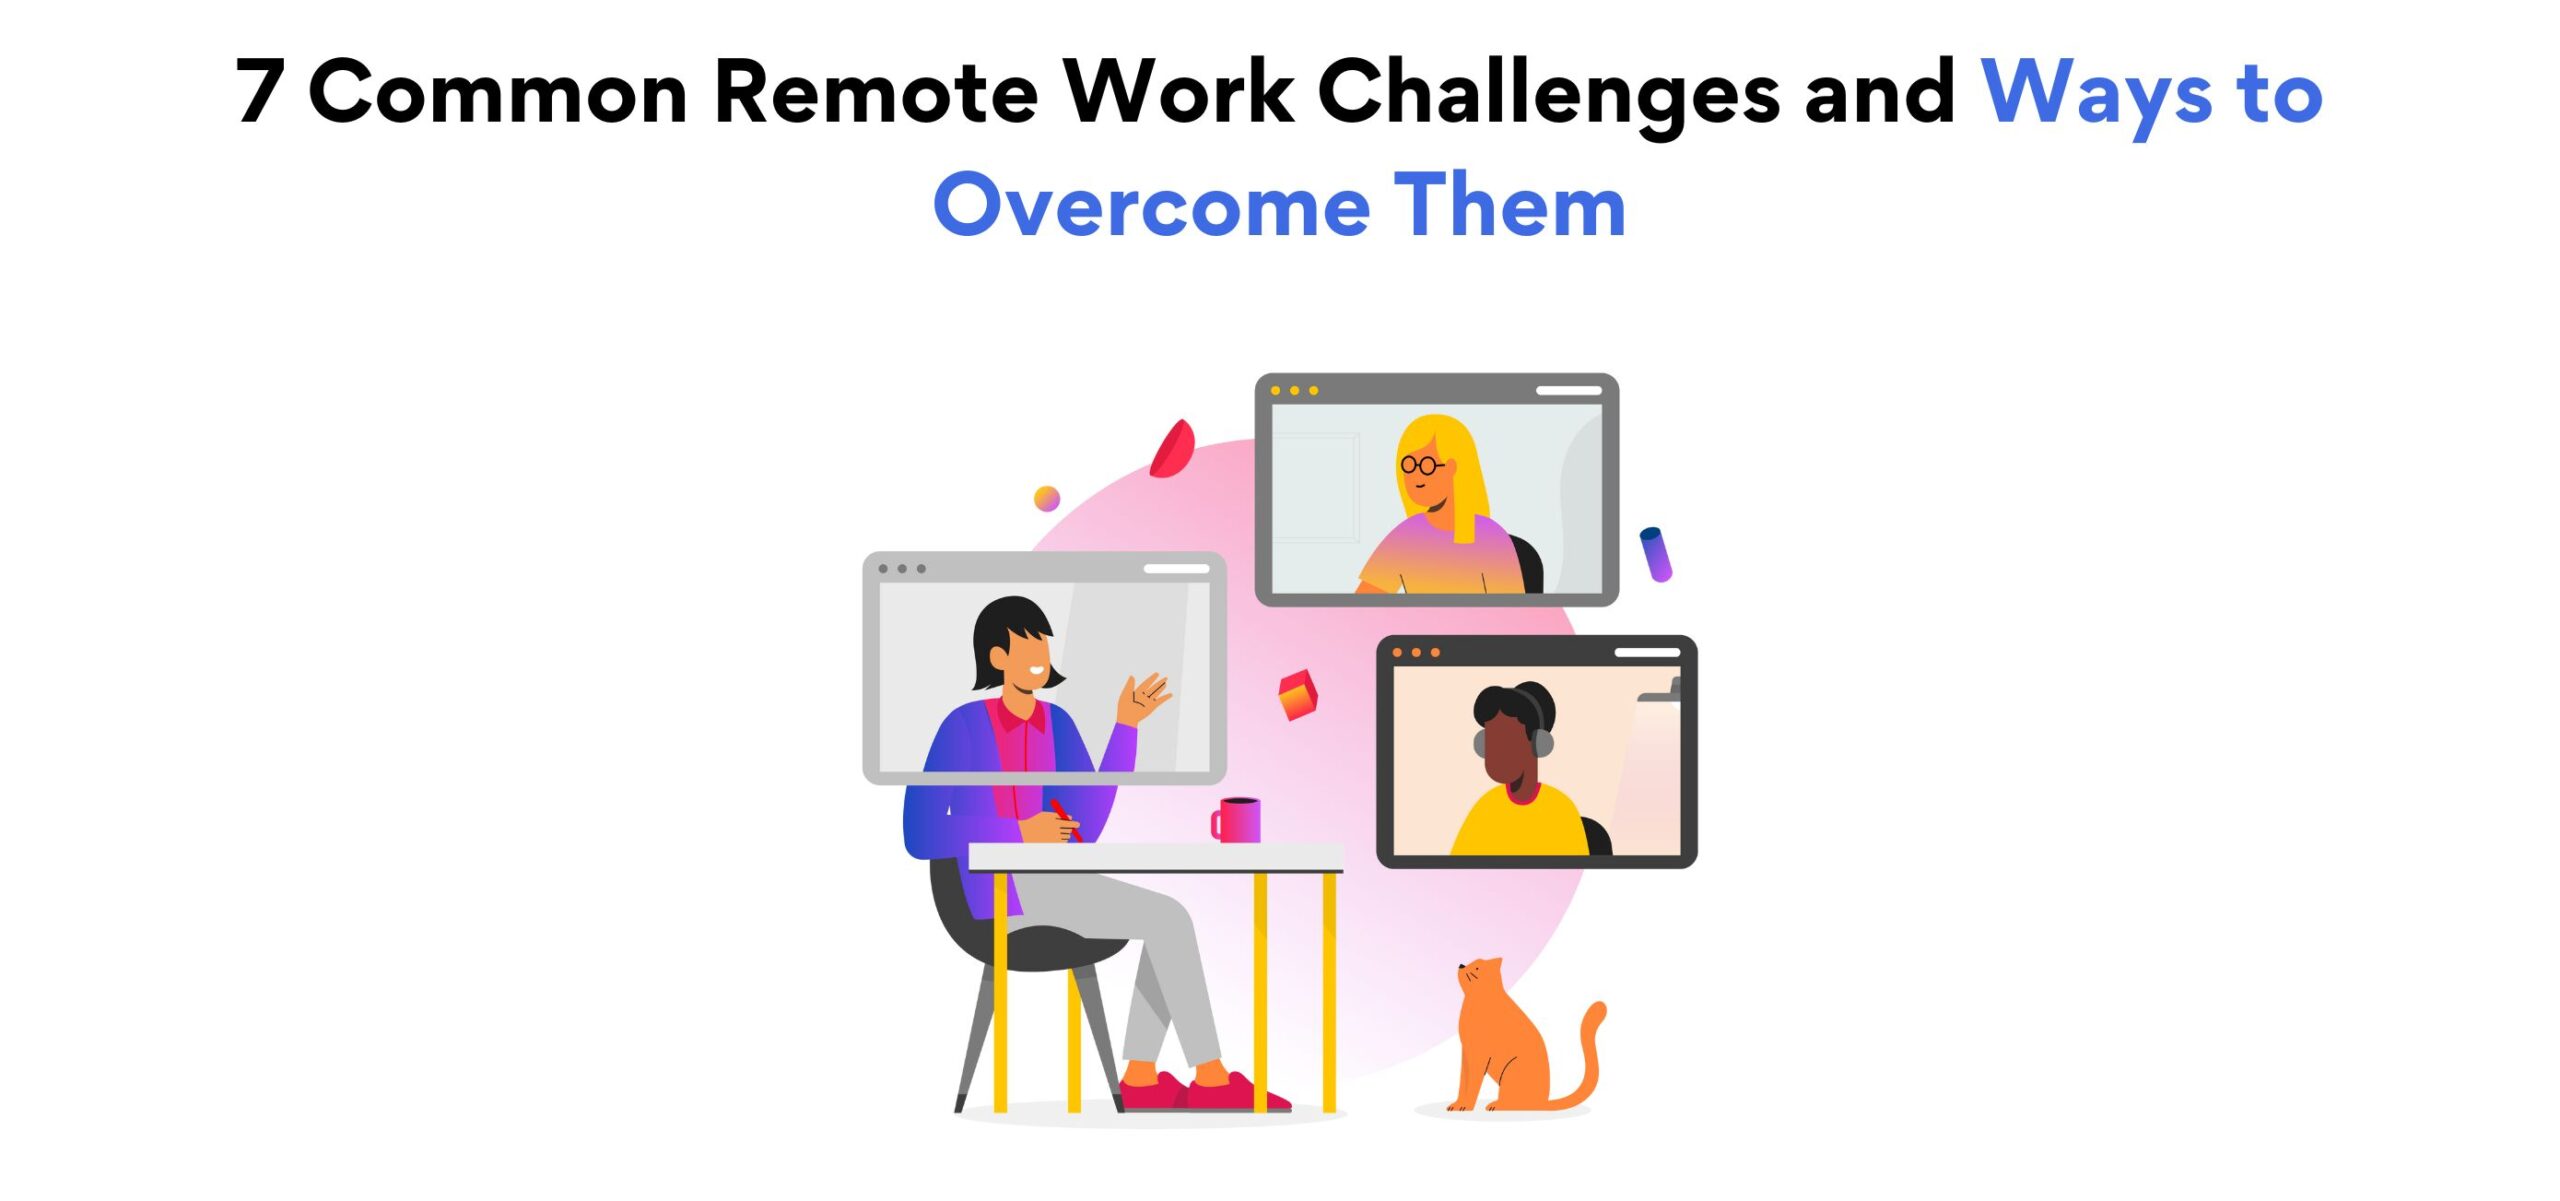 7 Common Remote Work Challenges and Ways to Overcome Them scaled